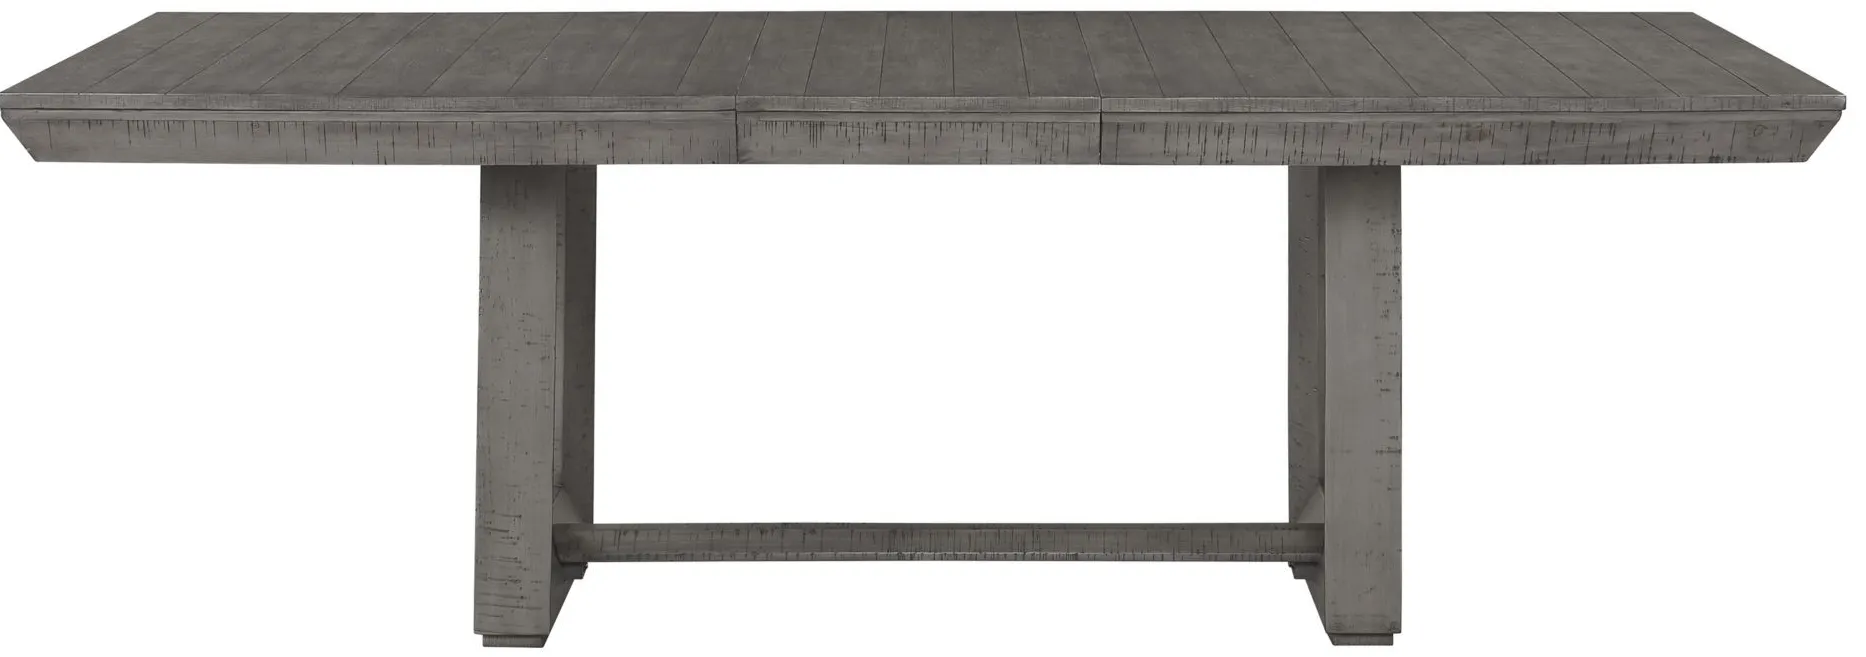 Gloversville Dining Room Table in Gray by Homelegance